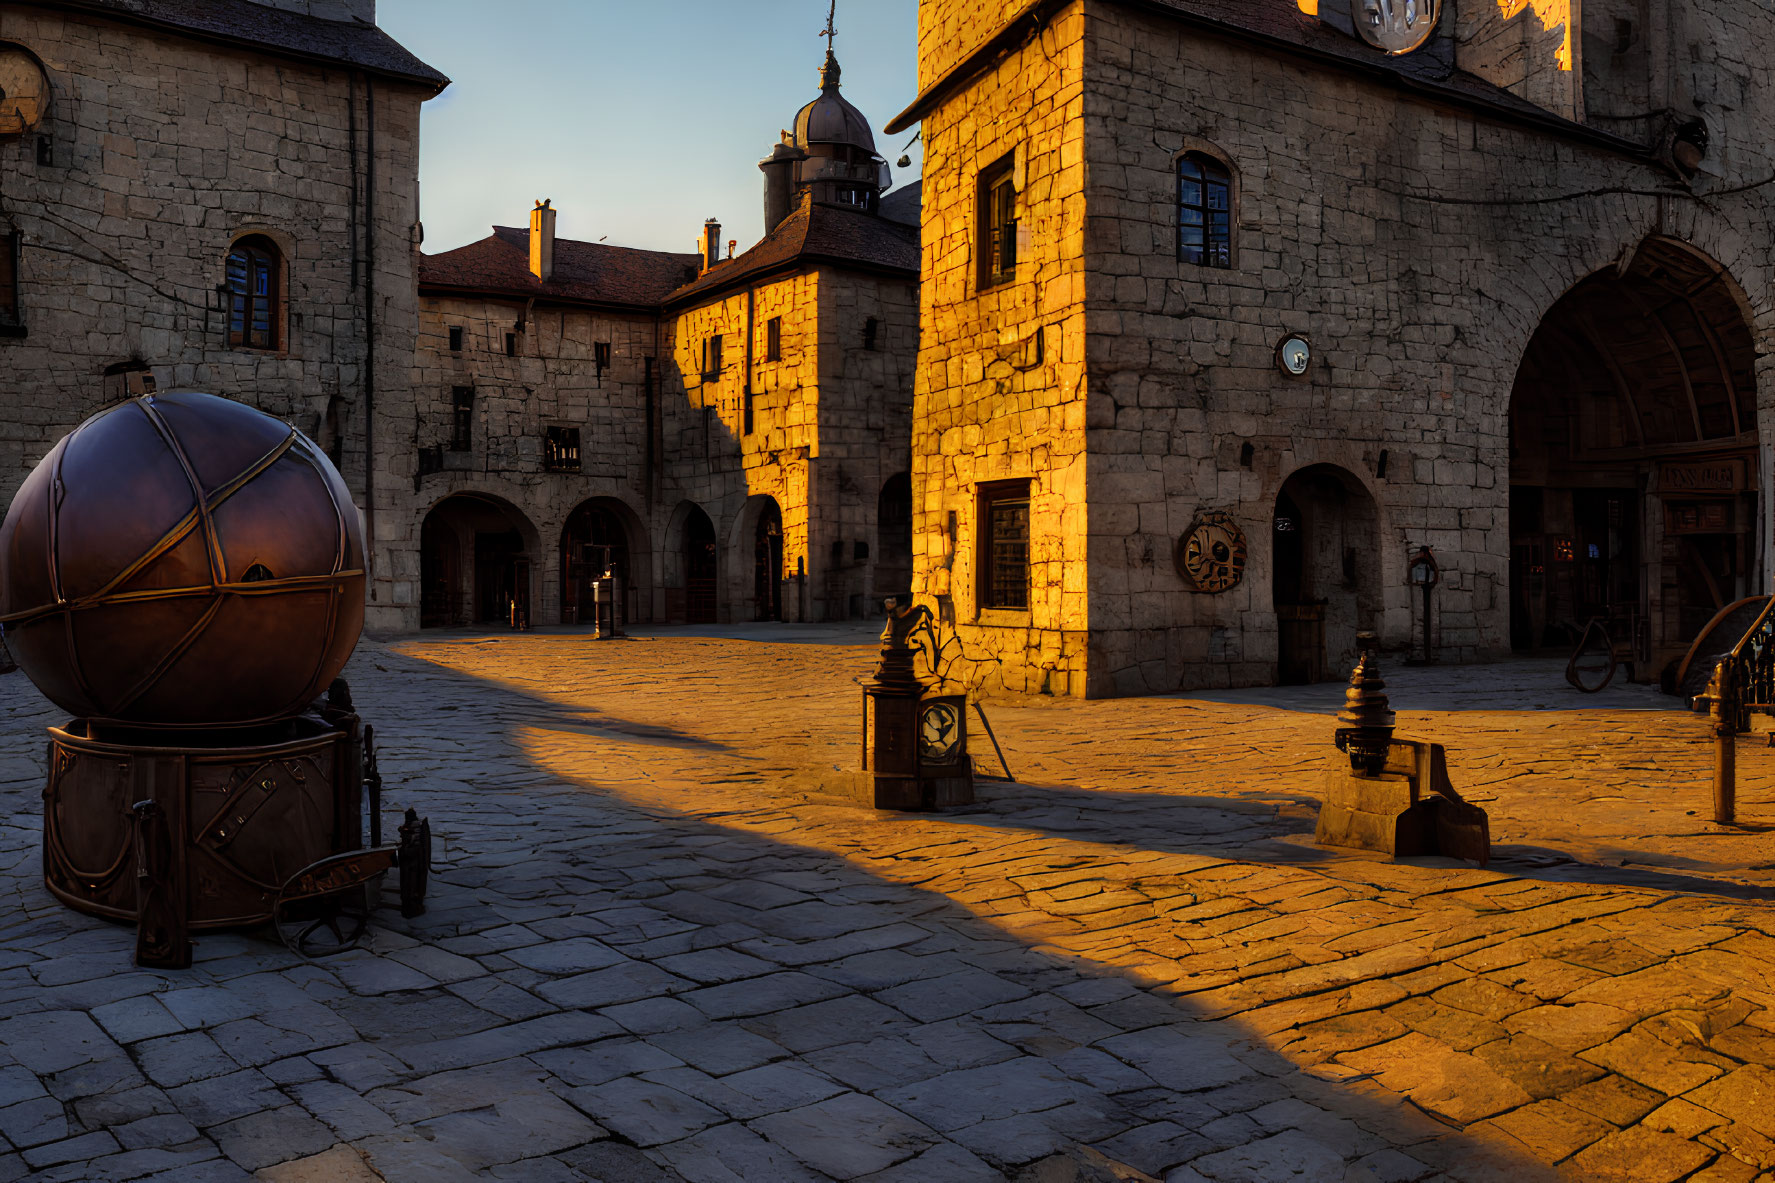 Medieval cobblestone square with spherical sculpture and art installations at sunset